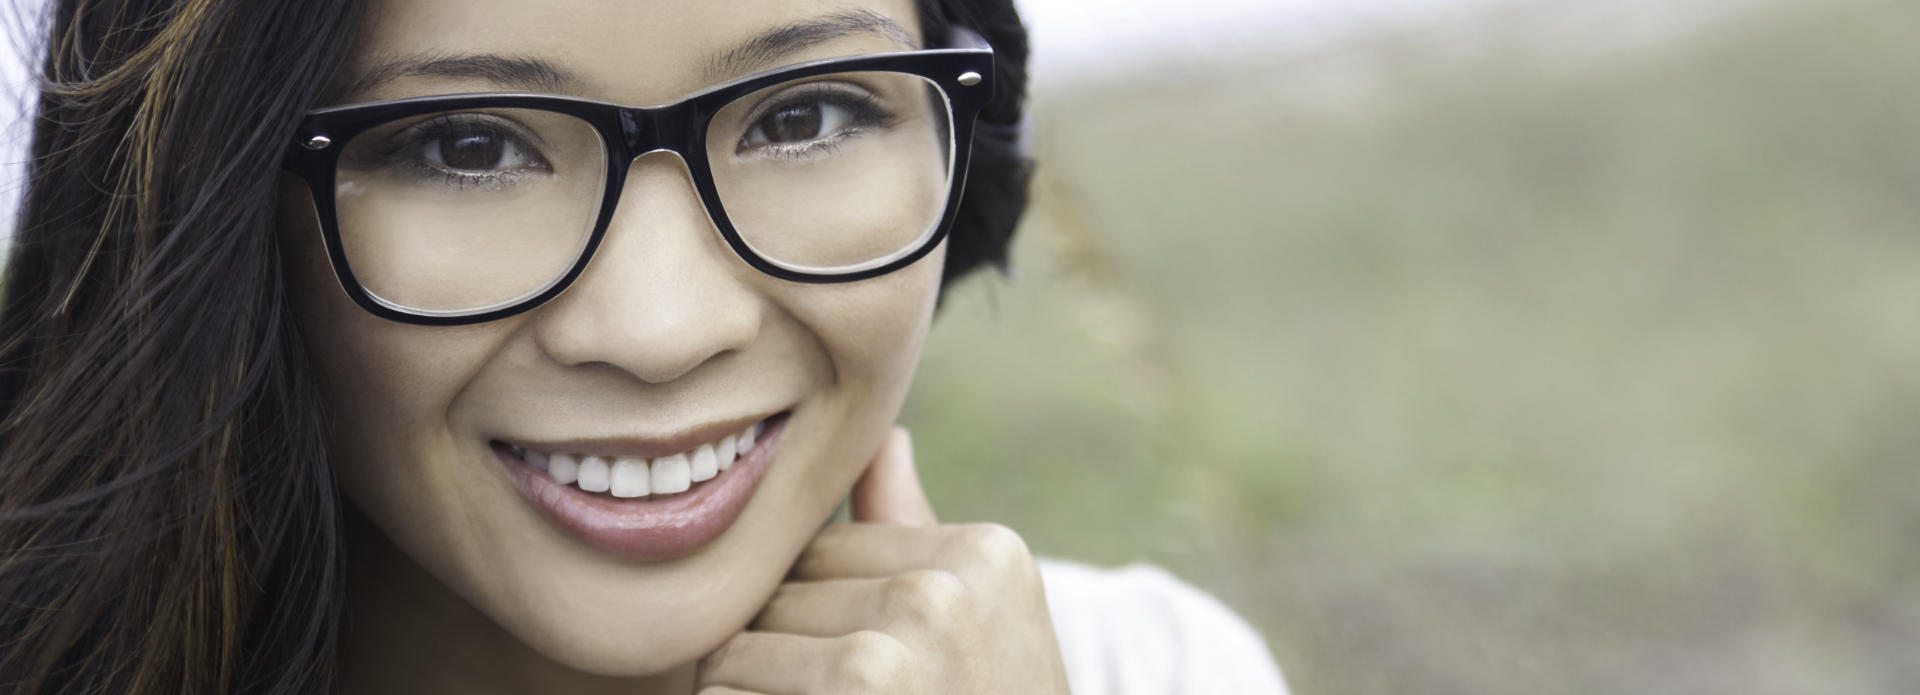 cheerful woman in glasses